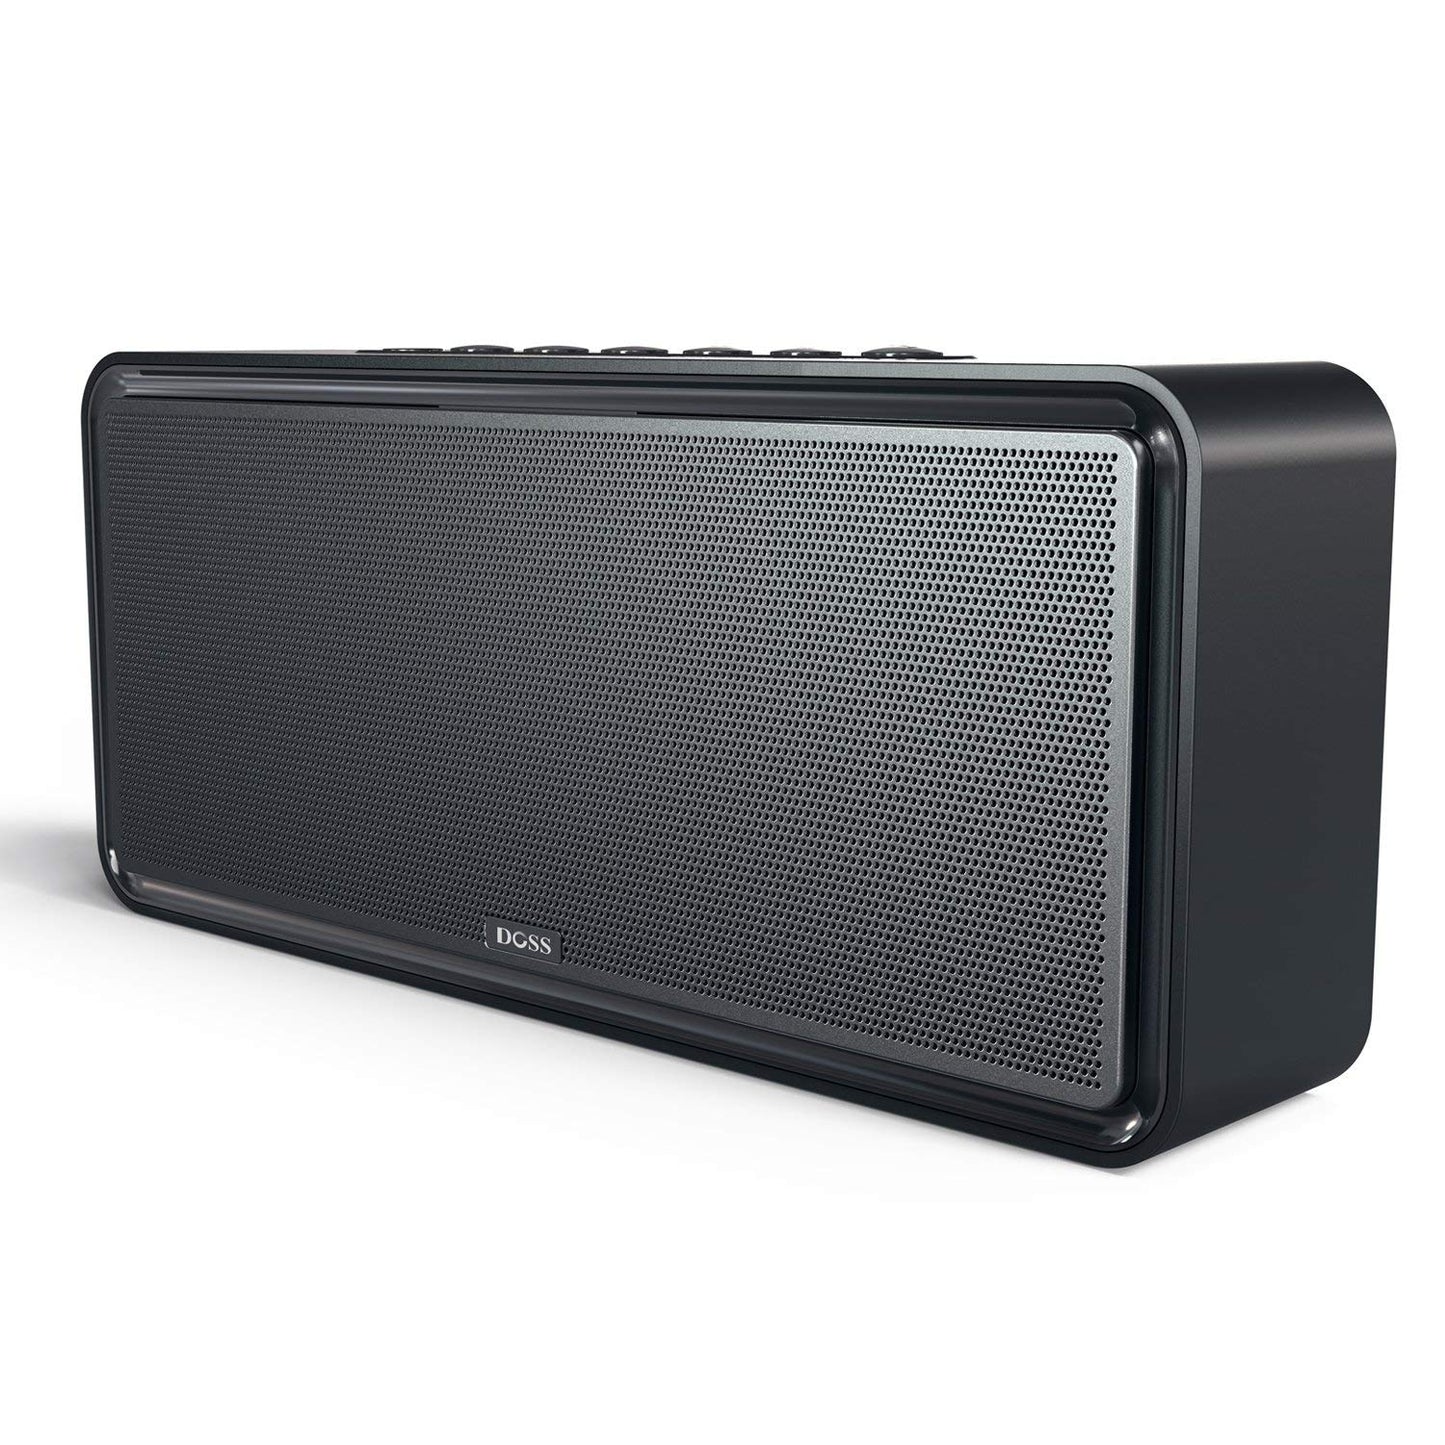 DOSS SoundBox XL 32W Bluetooth Speakers, Louder Volume 20W Driver, Enhanced Bass with 12W Subwoofer. Perfect Wireless Speaker for Phone, Tablet, TV, and More